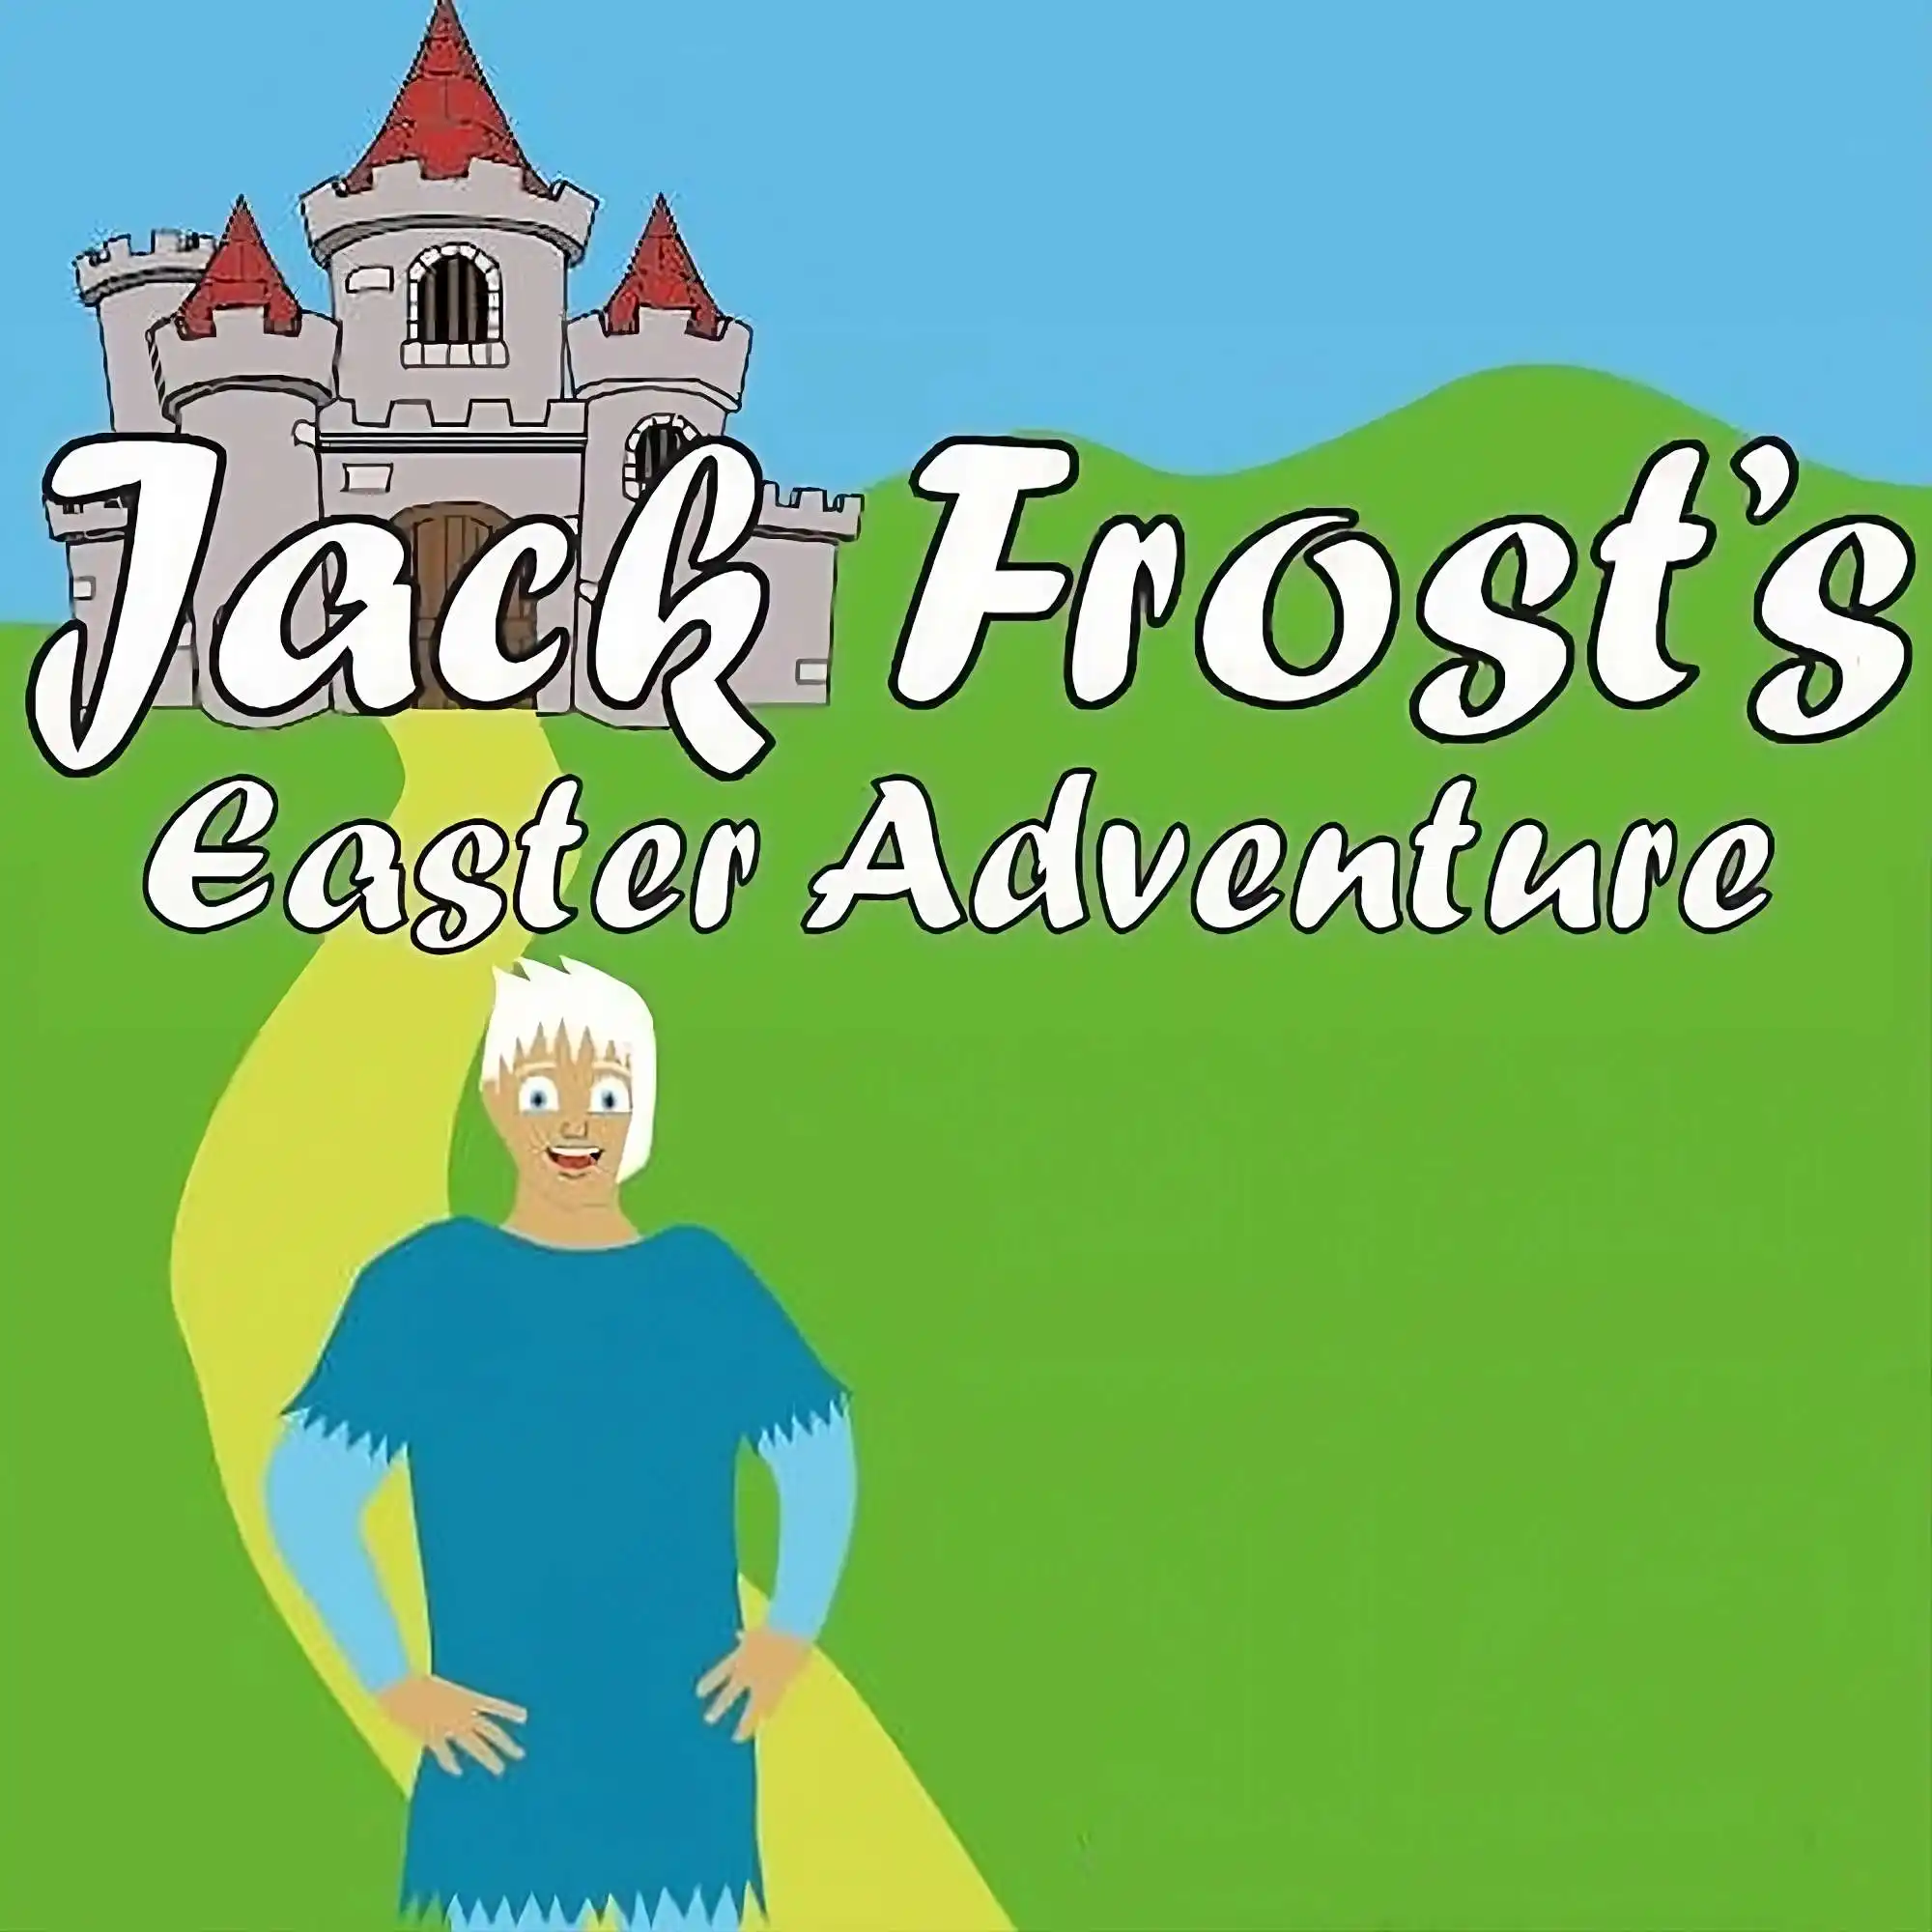 Jack Frost's Easter Adventure